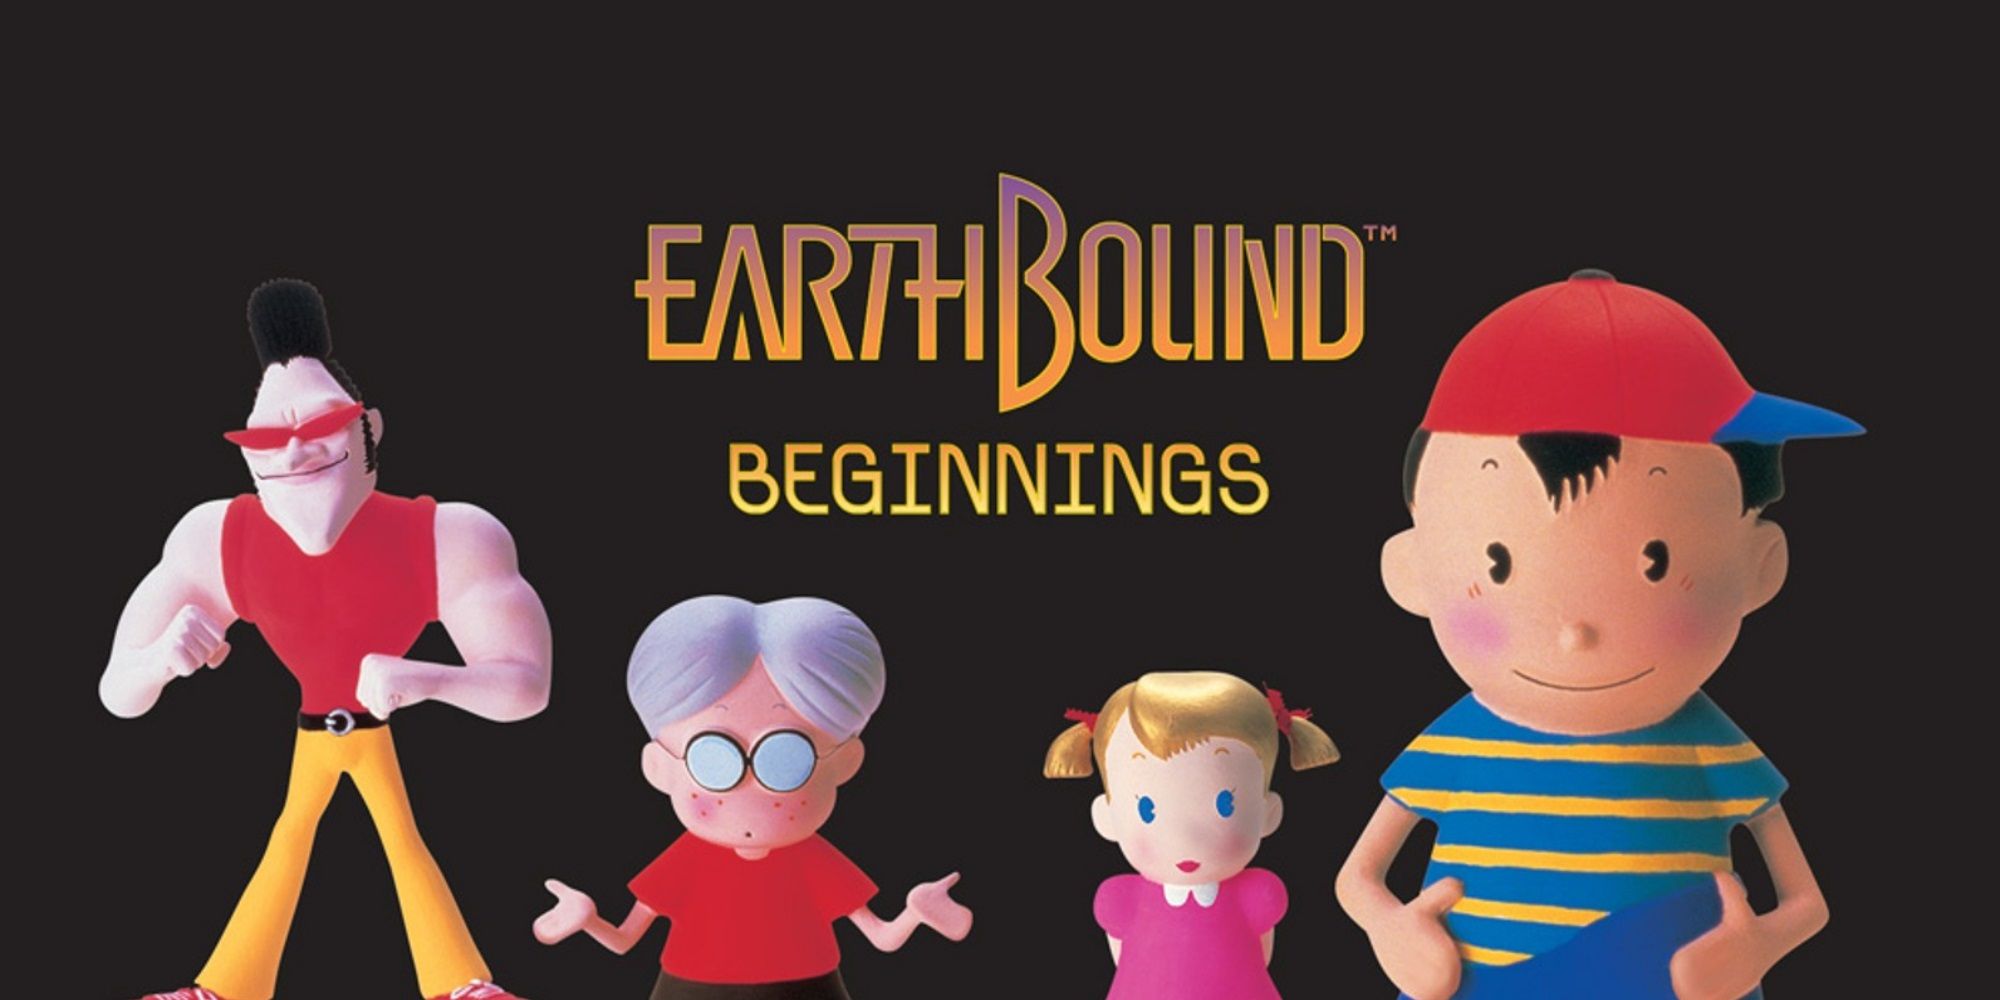 Earthbound Beginnings - A promo image of the game.